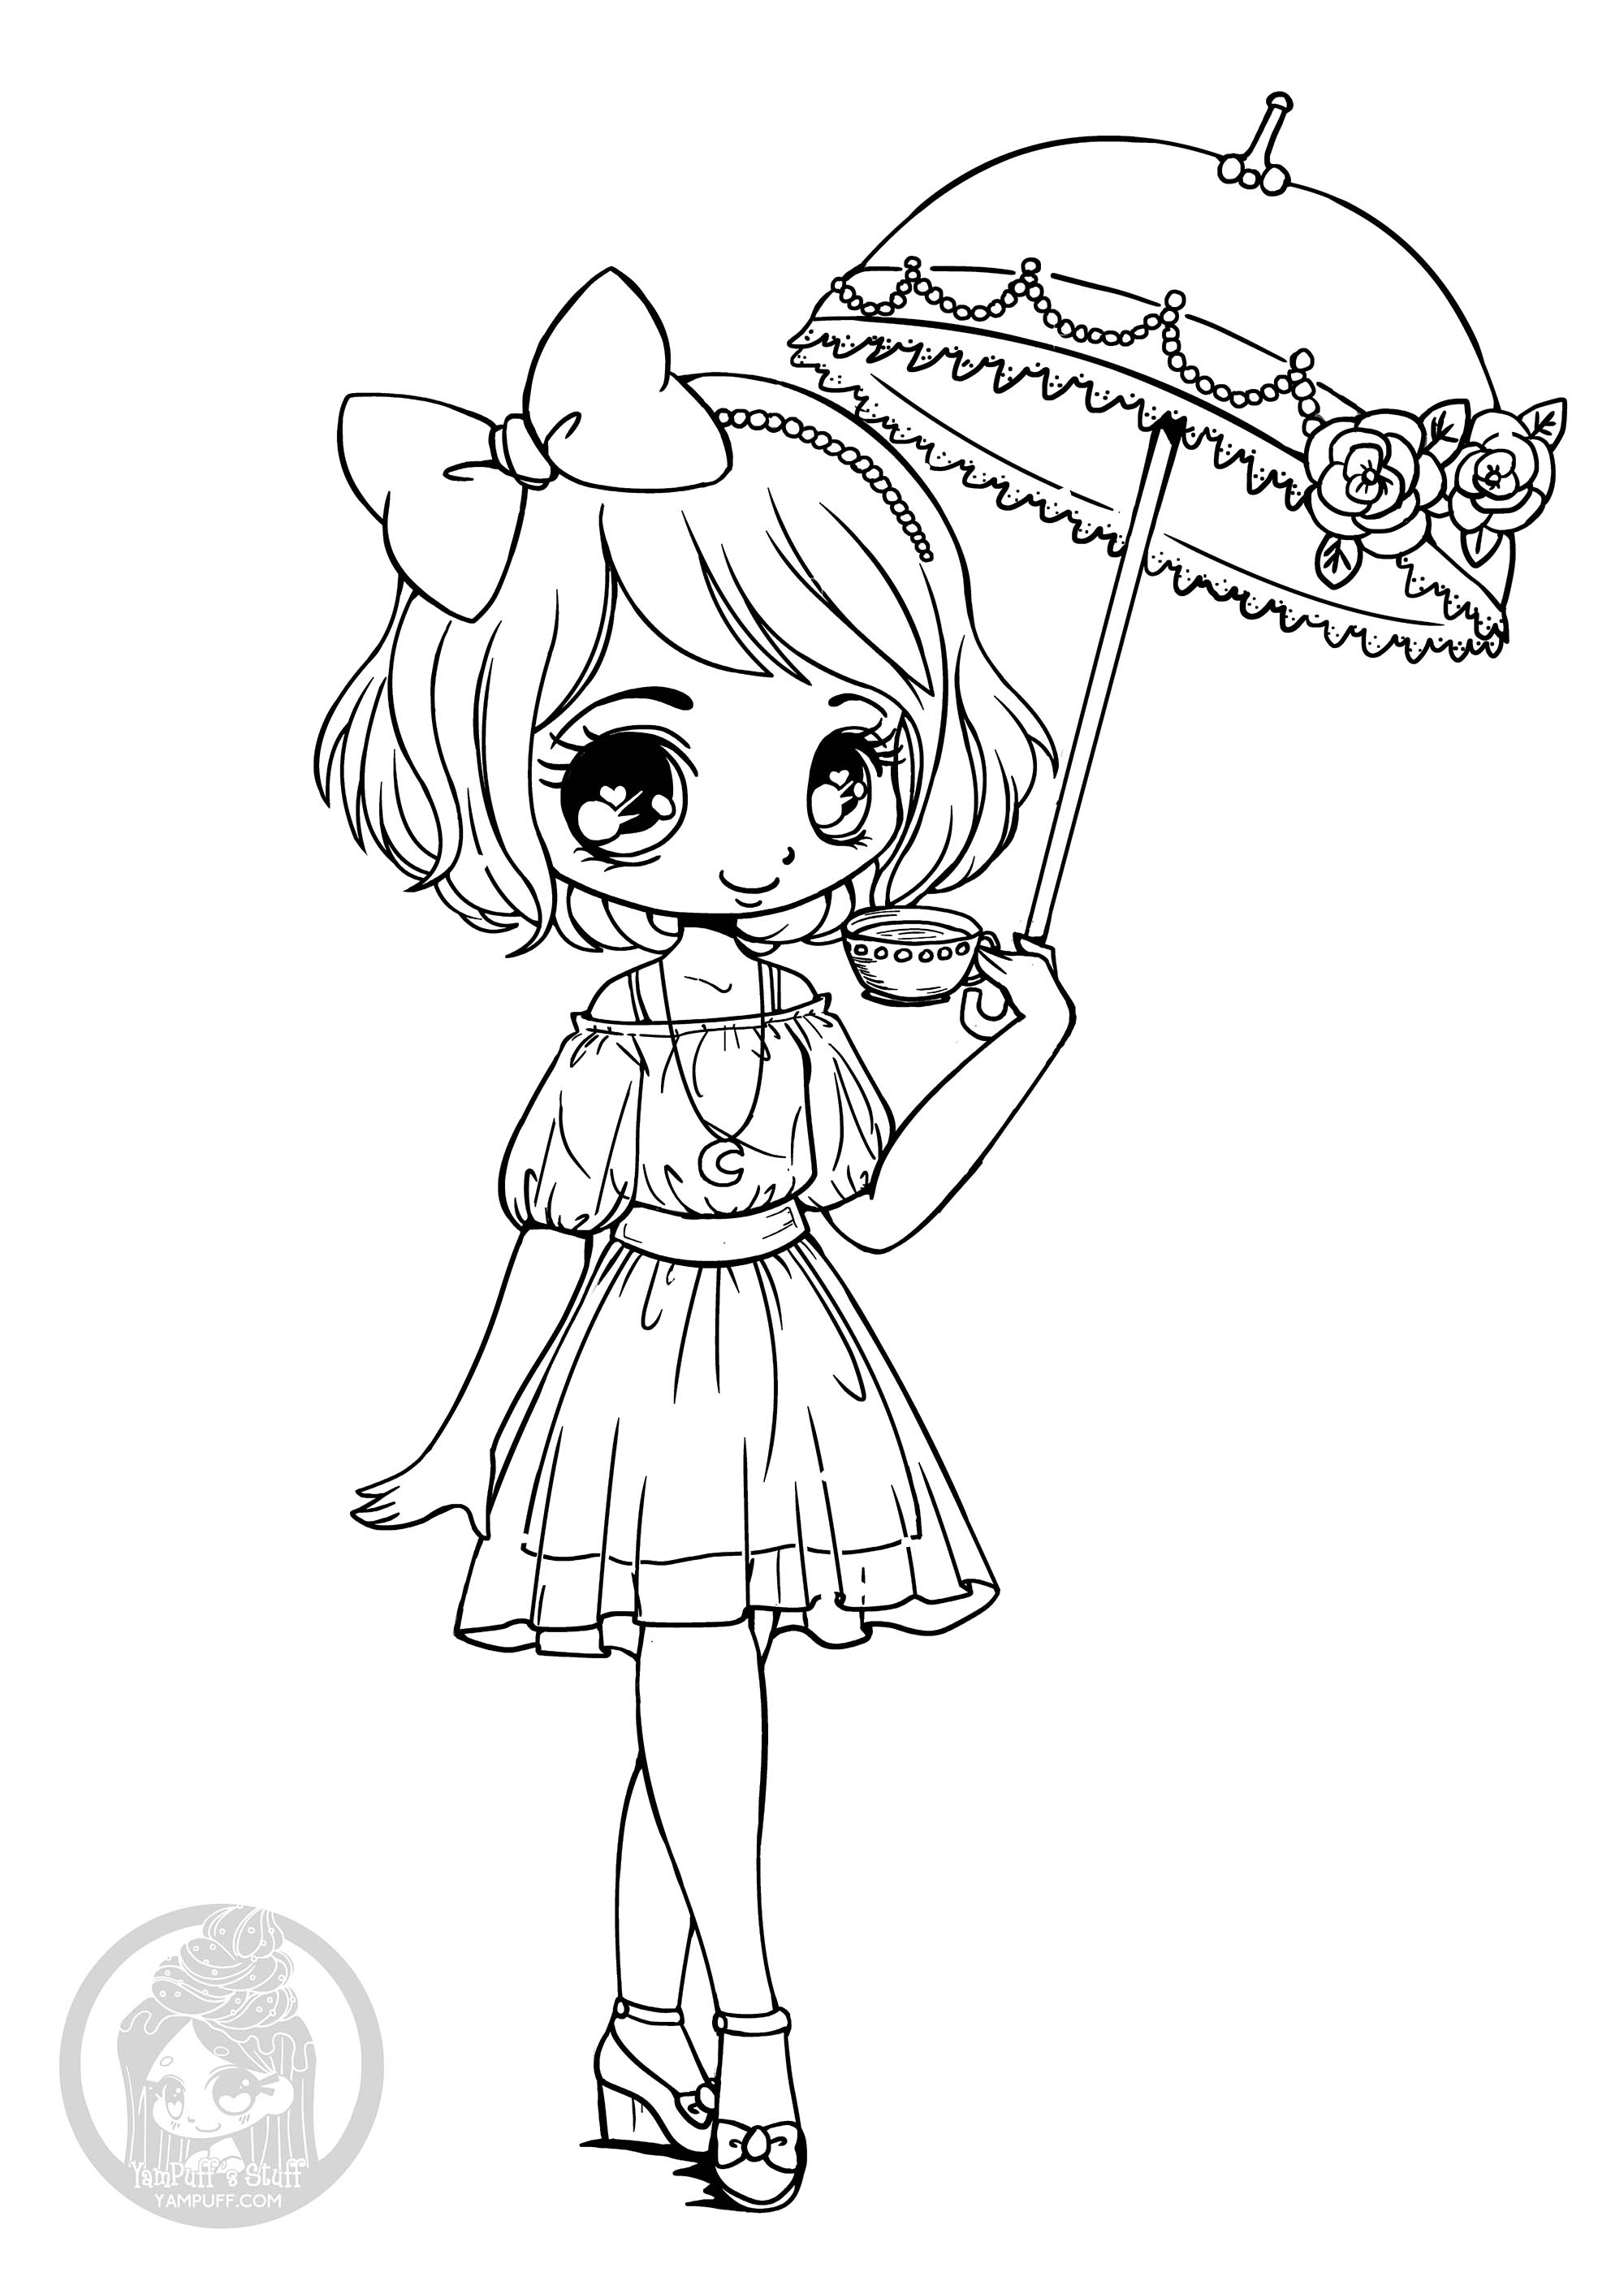 https://www.justcolor.net/kids/wp-content/uploads/sites/12/nggallery/kawaii/coloring-pages-for-children-kawaii-31362.jpg